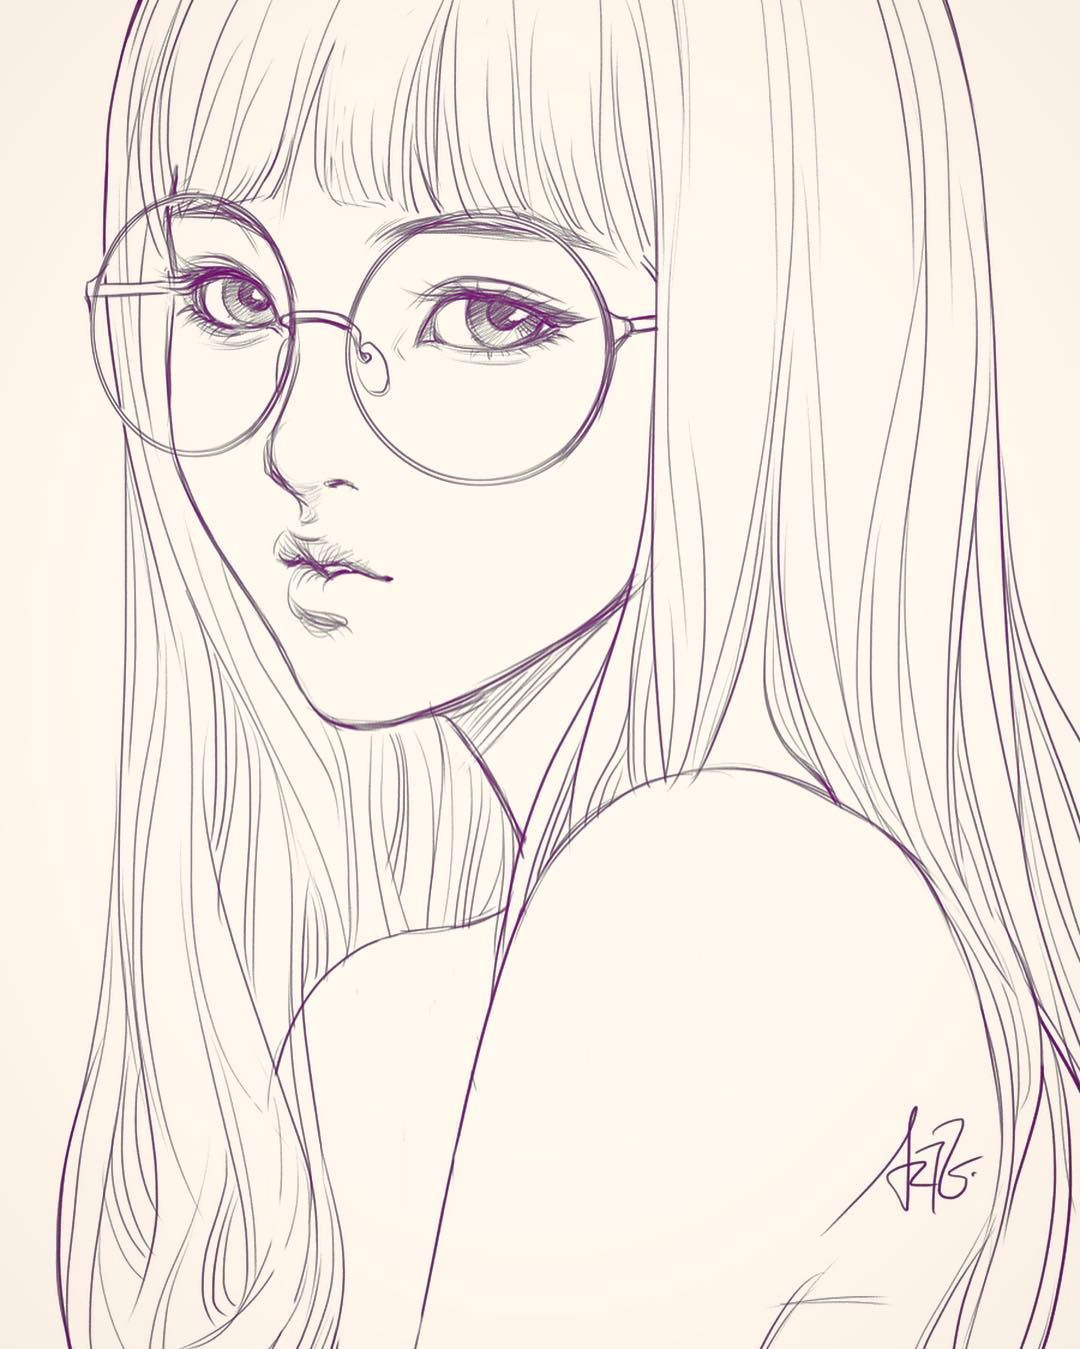 Line Drawing Of Eyeglasses Last Sketch Of Girl with Glasses Having Bad Backache It Hurts